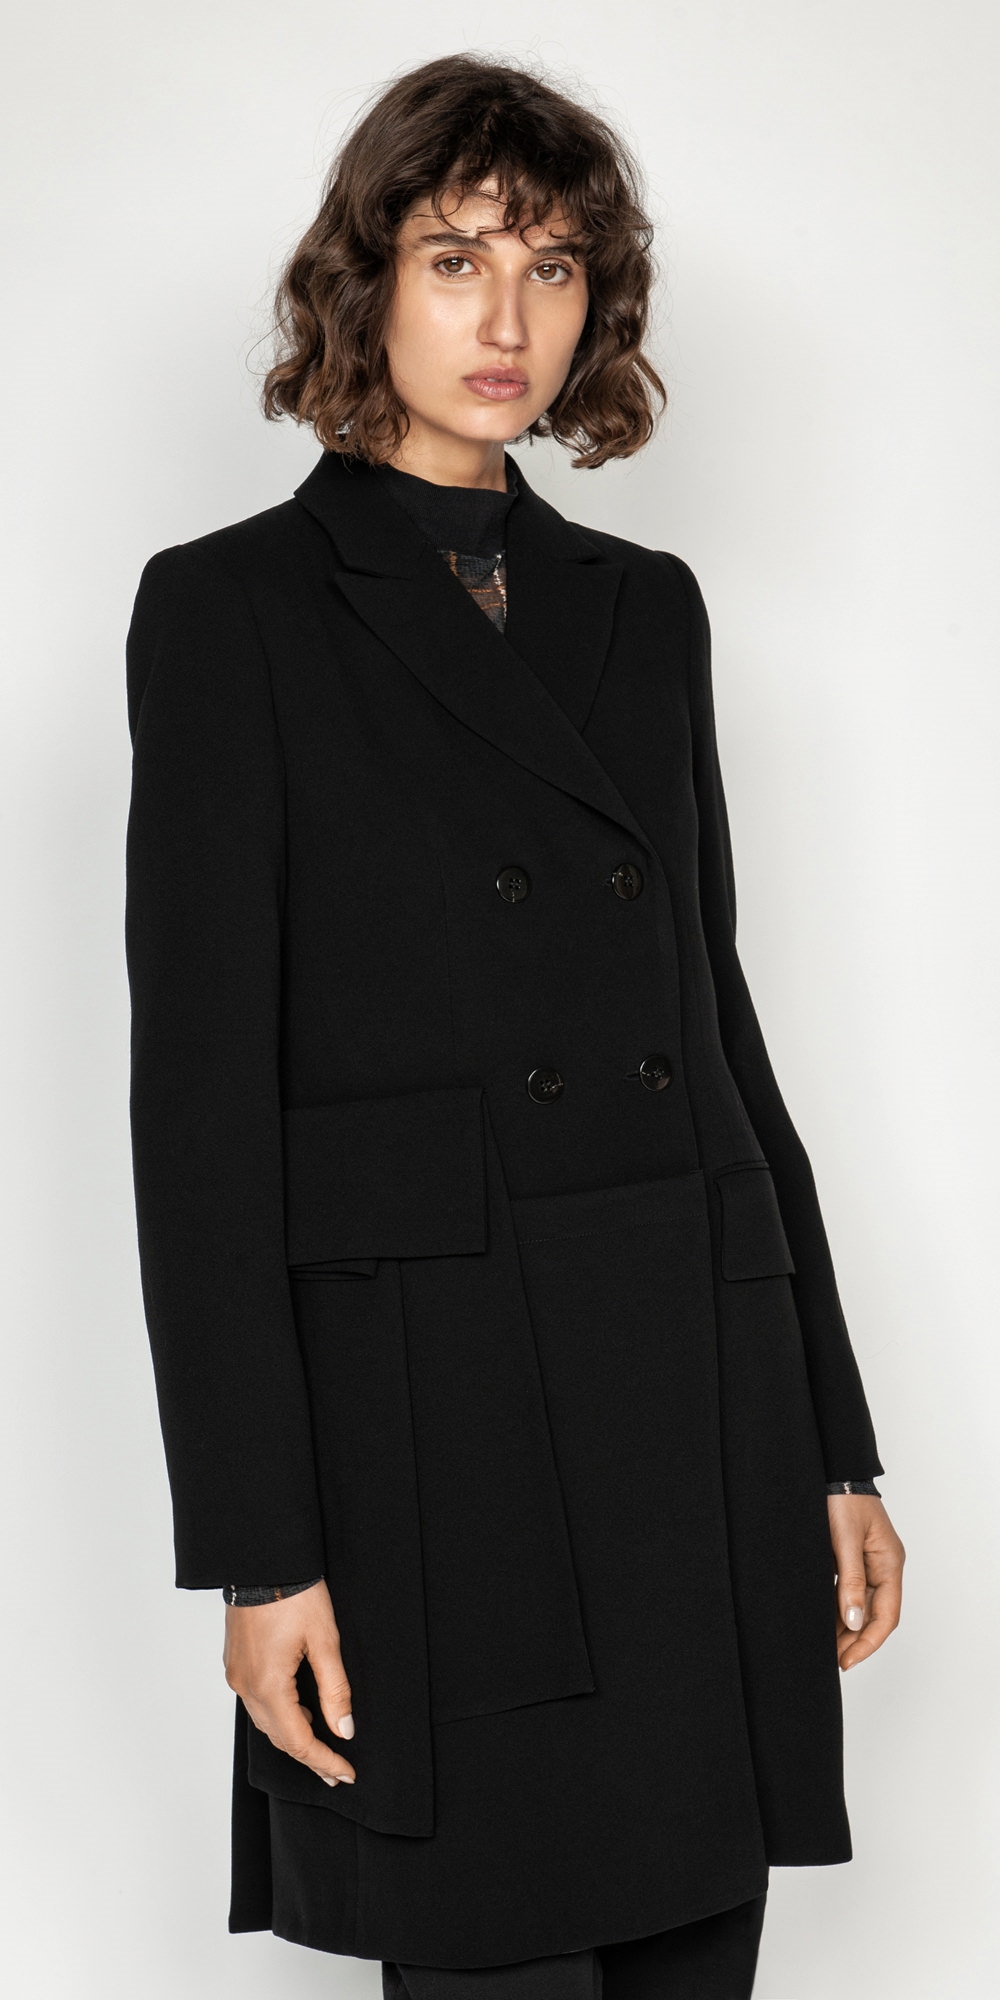 Asymmetric Double Breasted Coat | Buy Coats Online - Cue